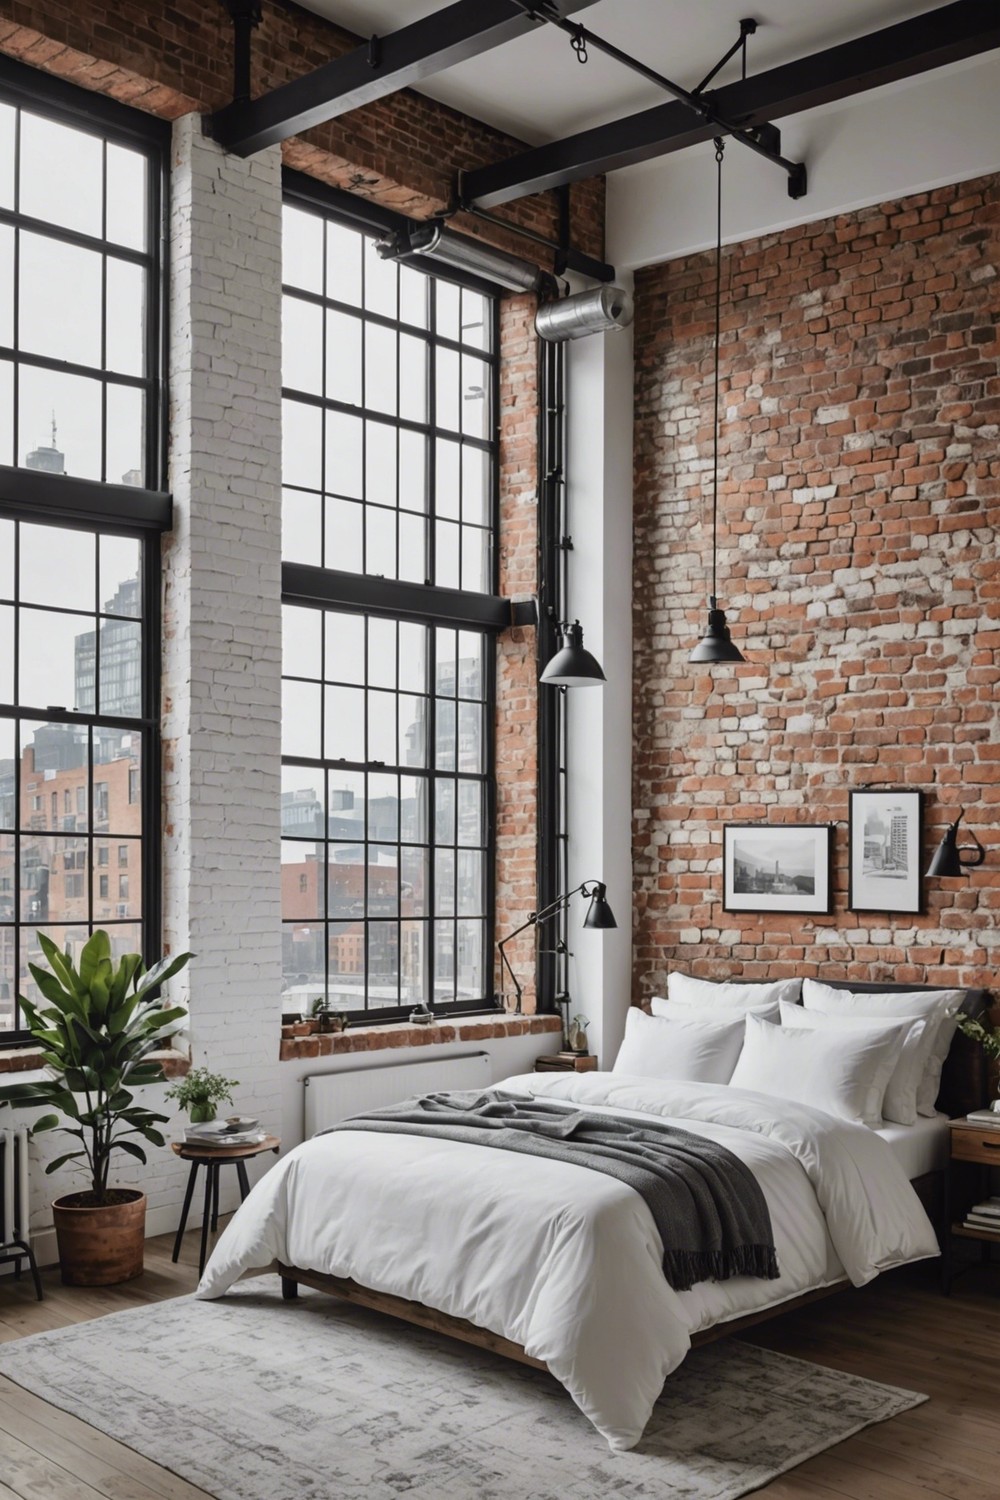 Urban Oasis: White Bedroom with Industrial Accents